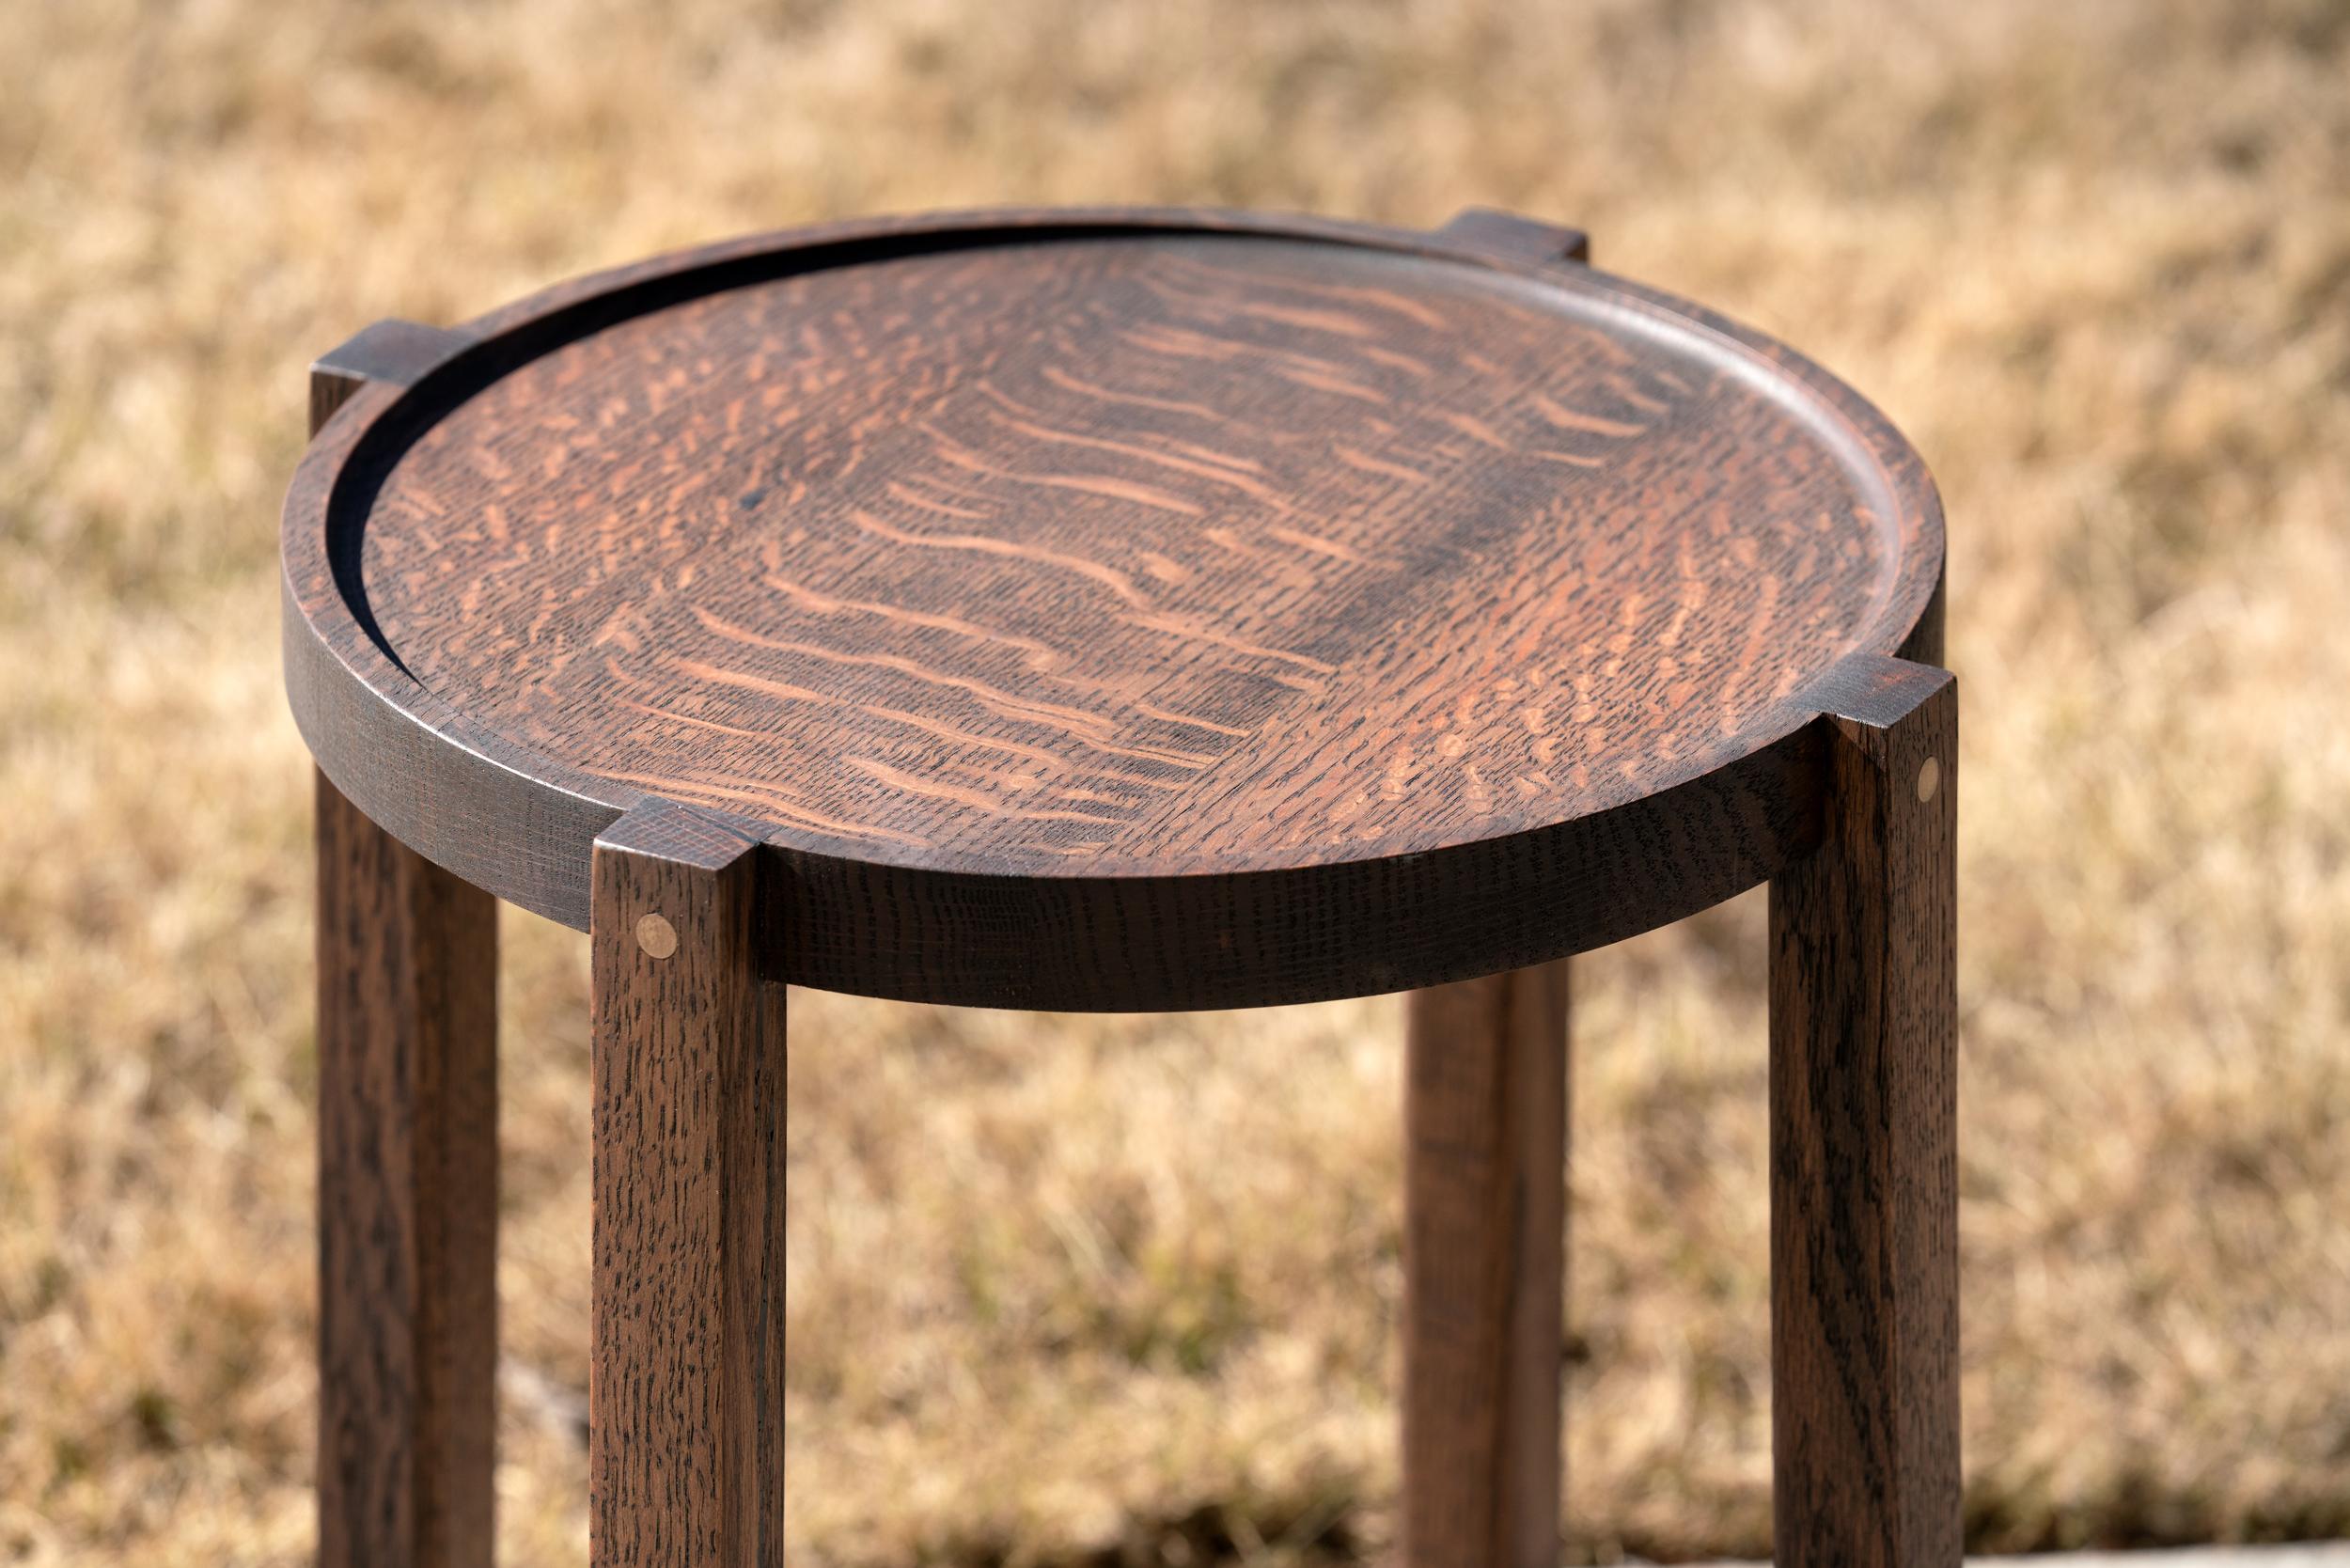 Introducing the Waverly Table. This versatile end table is made of the finest repurposed urban timber. A dark wood finish compliments the natural grain and rounded edges of this well crafted wooden table. Sturdy yet lightweight, the Waverly can be